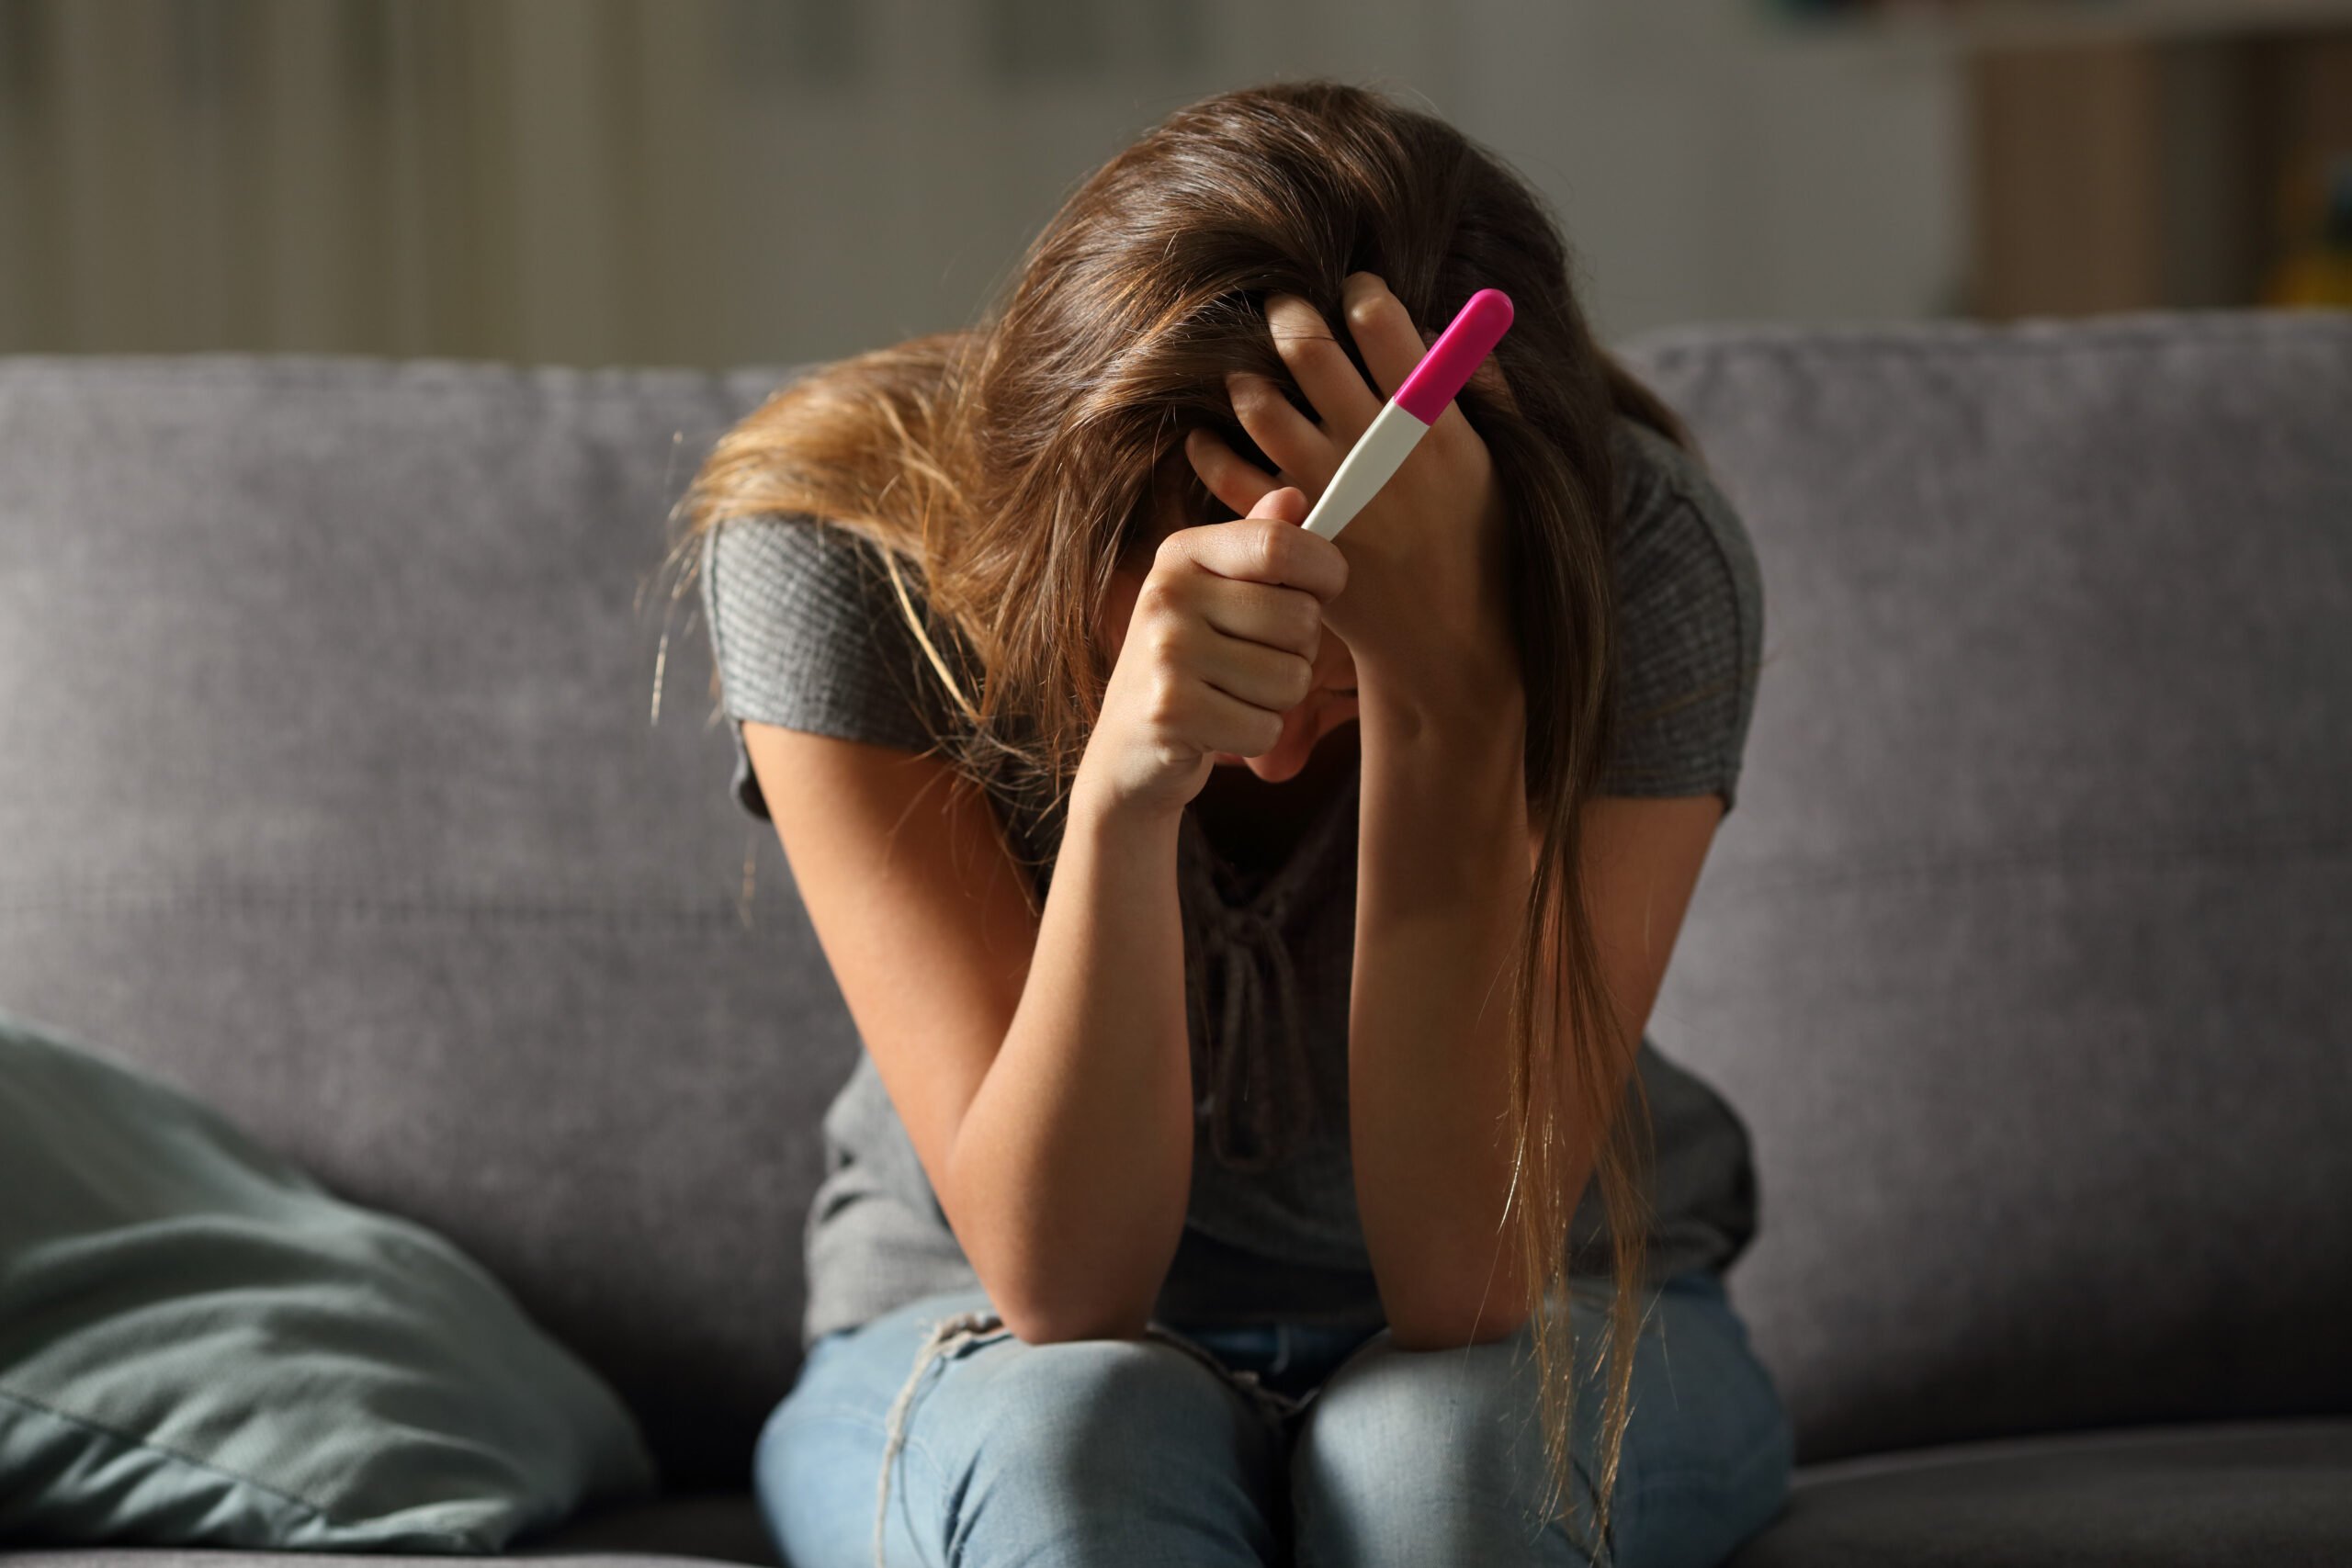 A young woman or teen sitting on a couch, head in hands with sadness or despair, as she holds a pregnancy test in one hand.